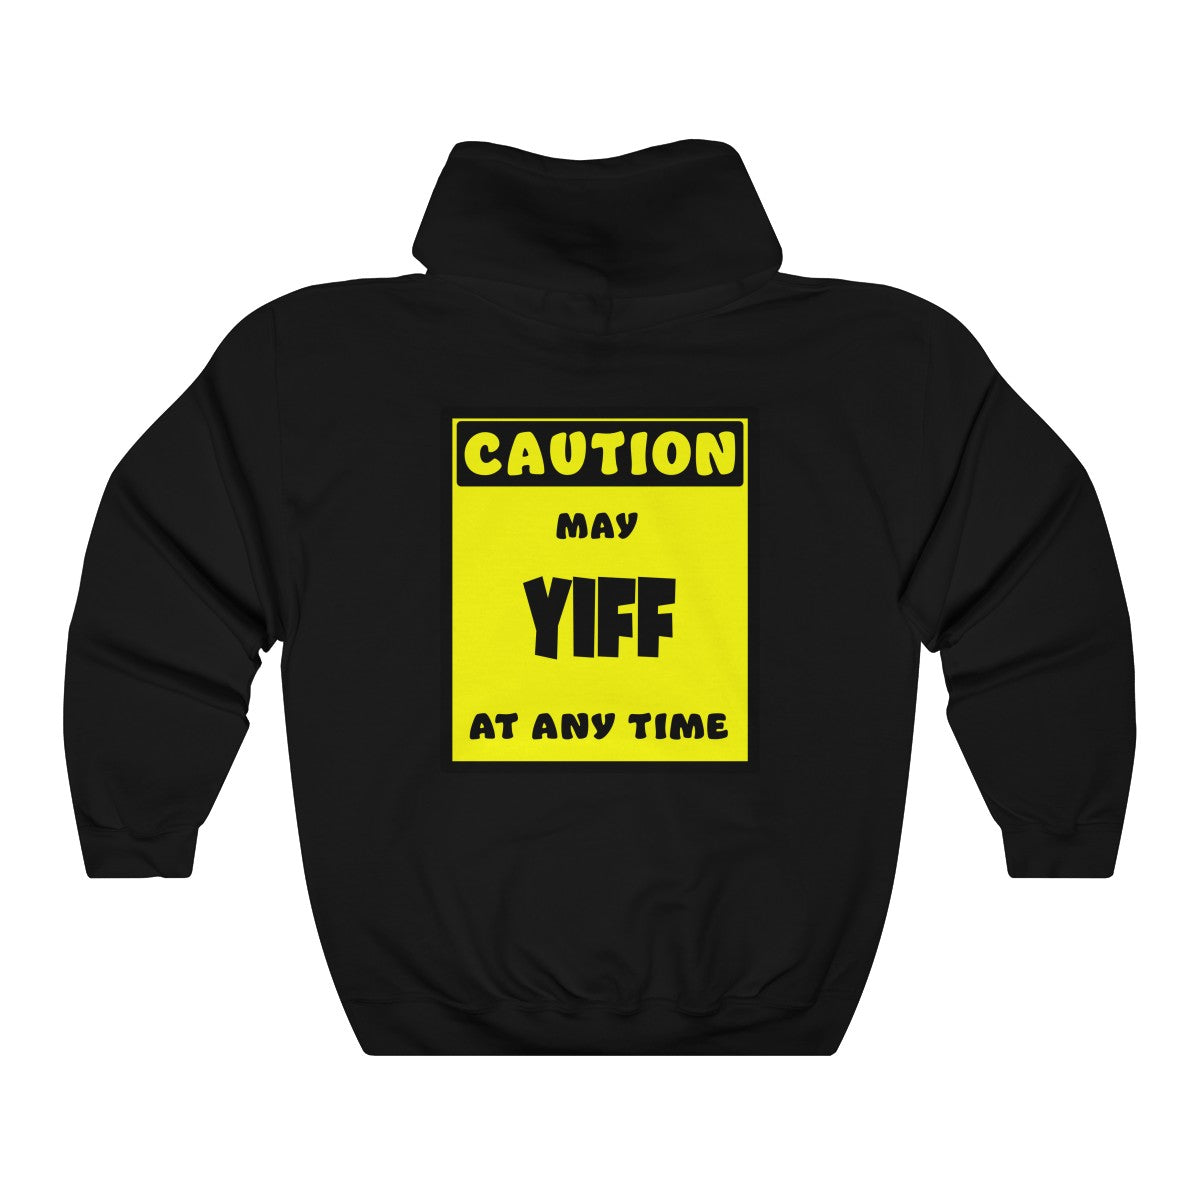 CAUTION! May YIFF at any time! - Hoodie Hoodie AFLT-Whootorca Black S 